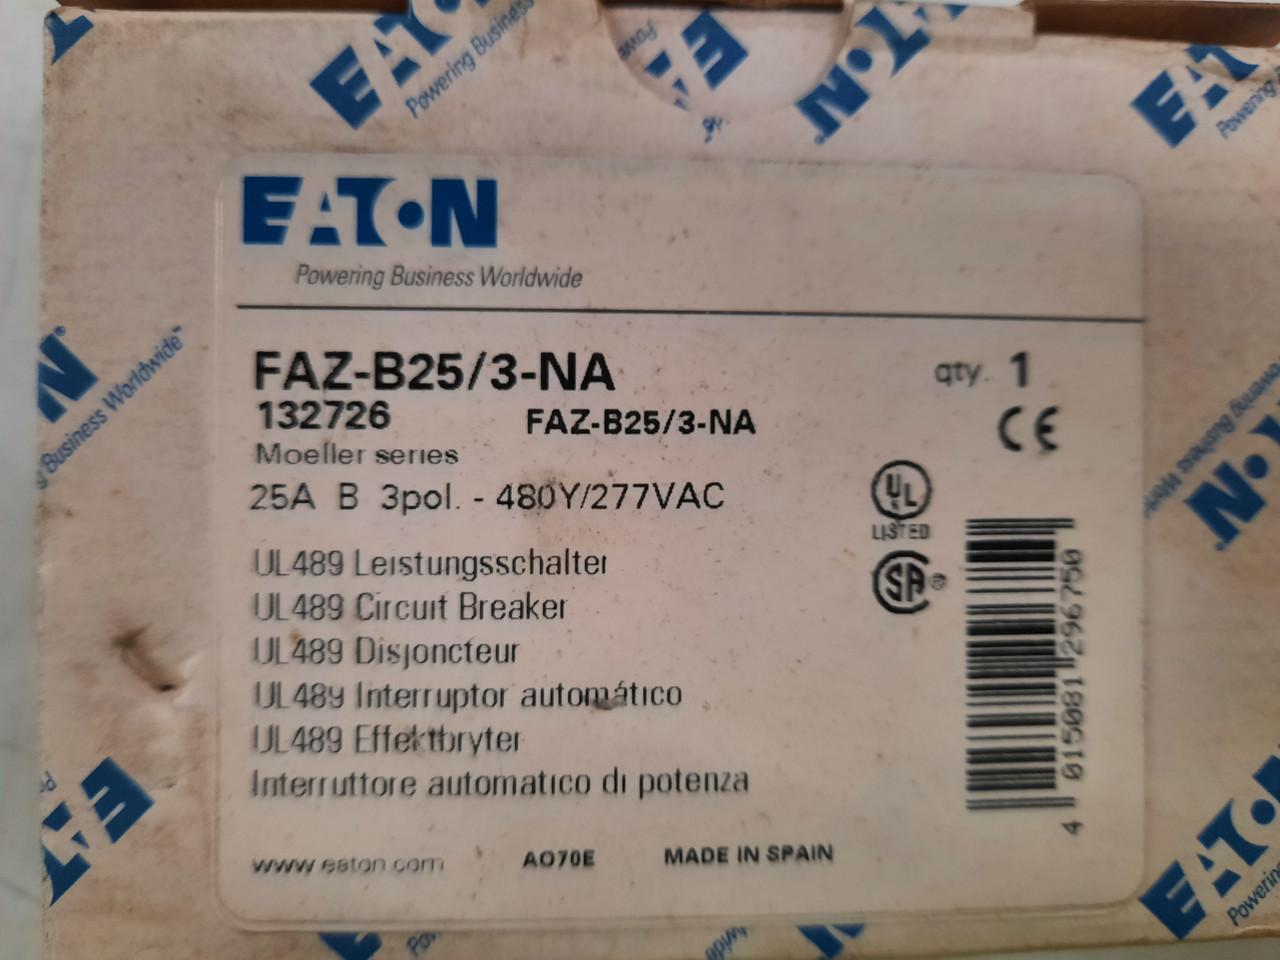 Eaton FAZ-B25/3-NA 277/480 VAC 50/60 Hz, 25 A, 3-Pole, 10/14 kA, 3 to 5 x Rated Current, Screw Terminal, DIN Rail Mount, Standard Packaging, B-Curve, Current Limiting, Thermal Magnetic